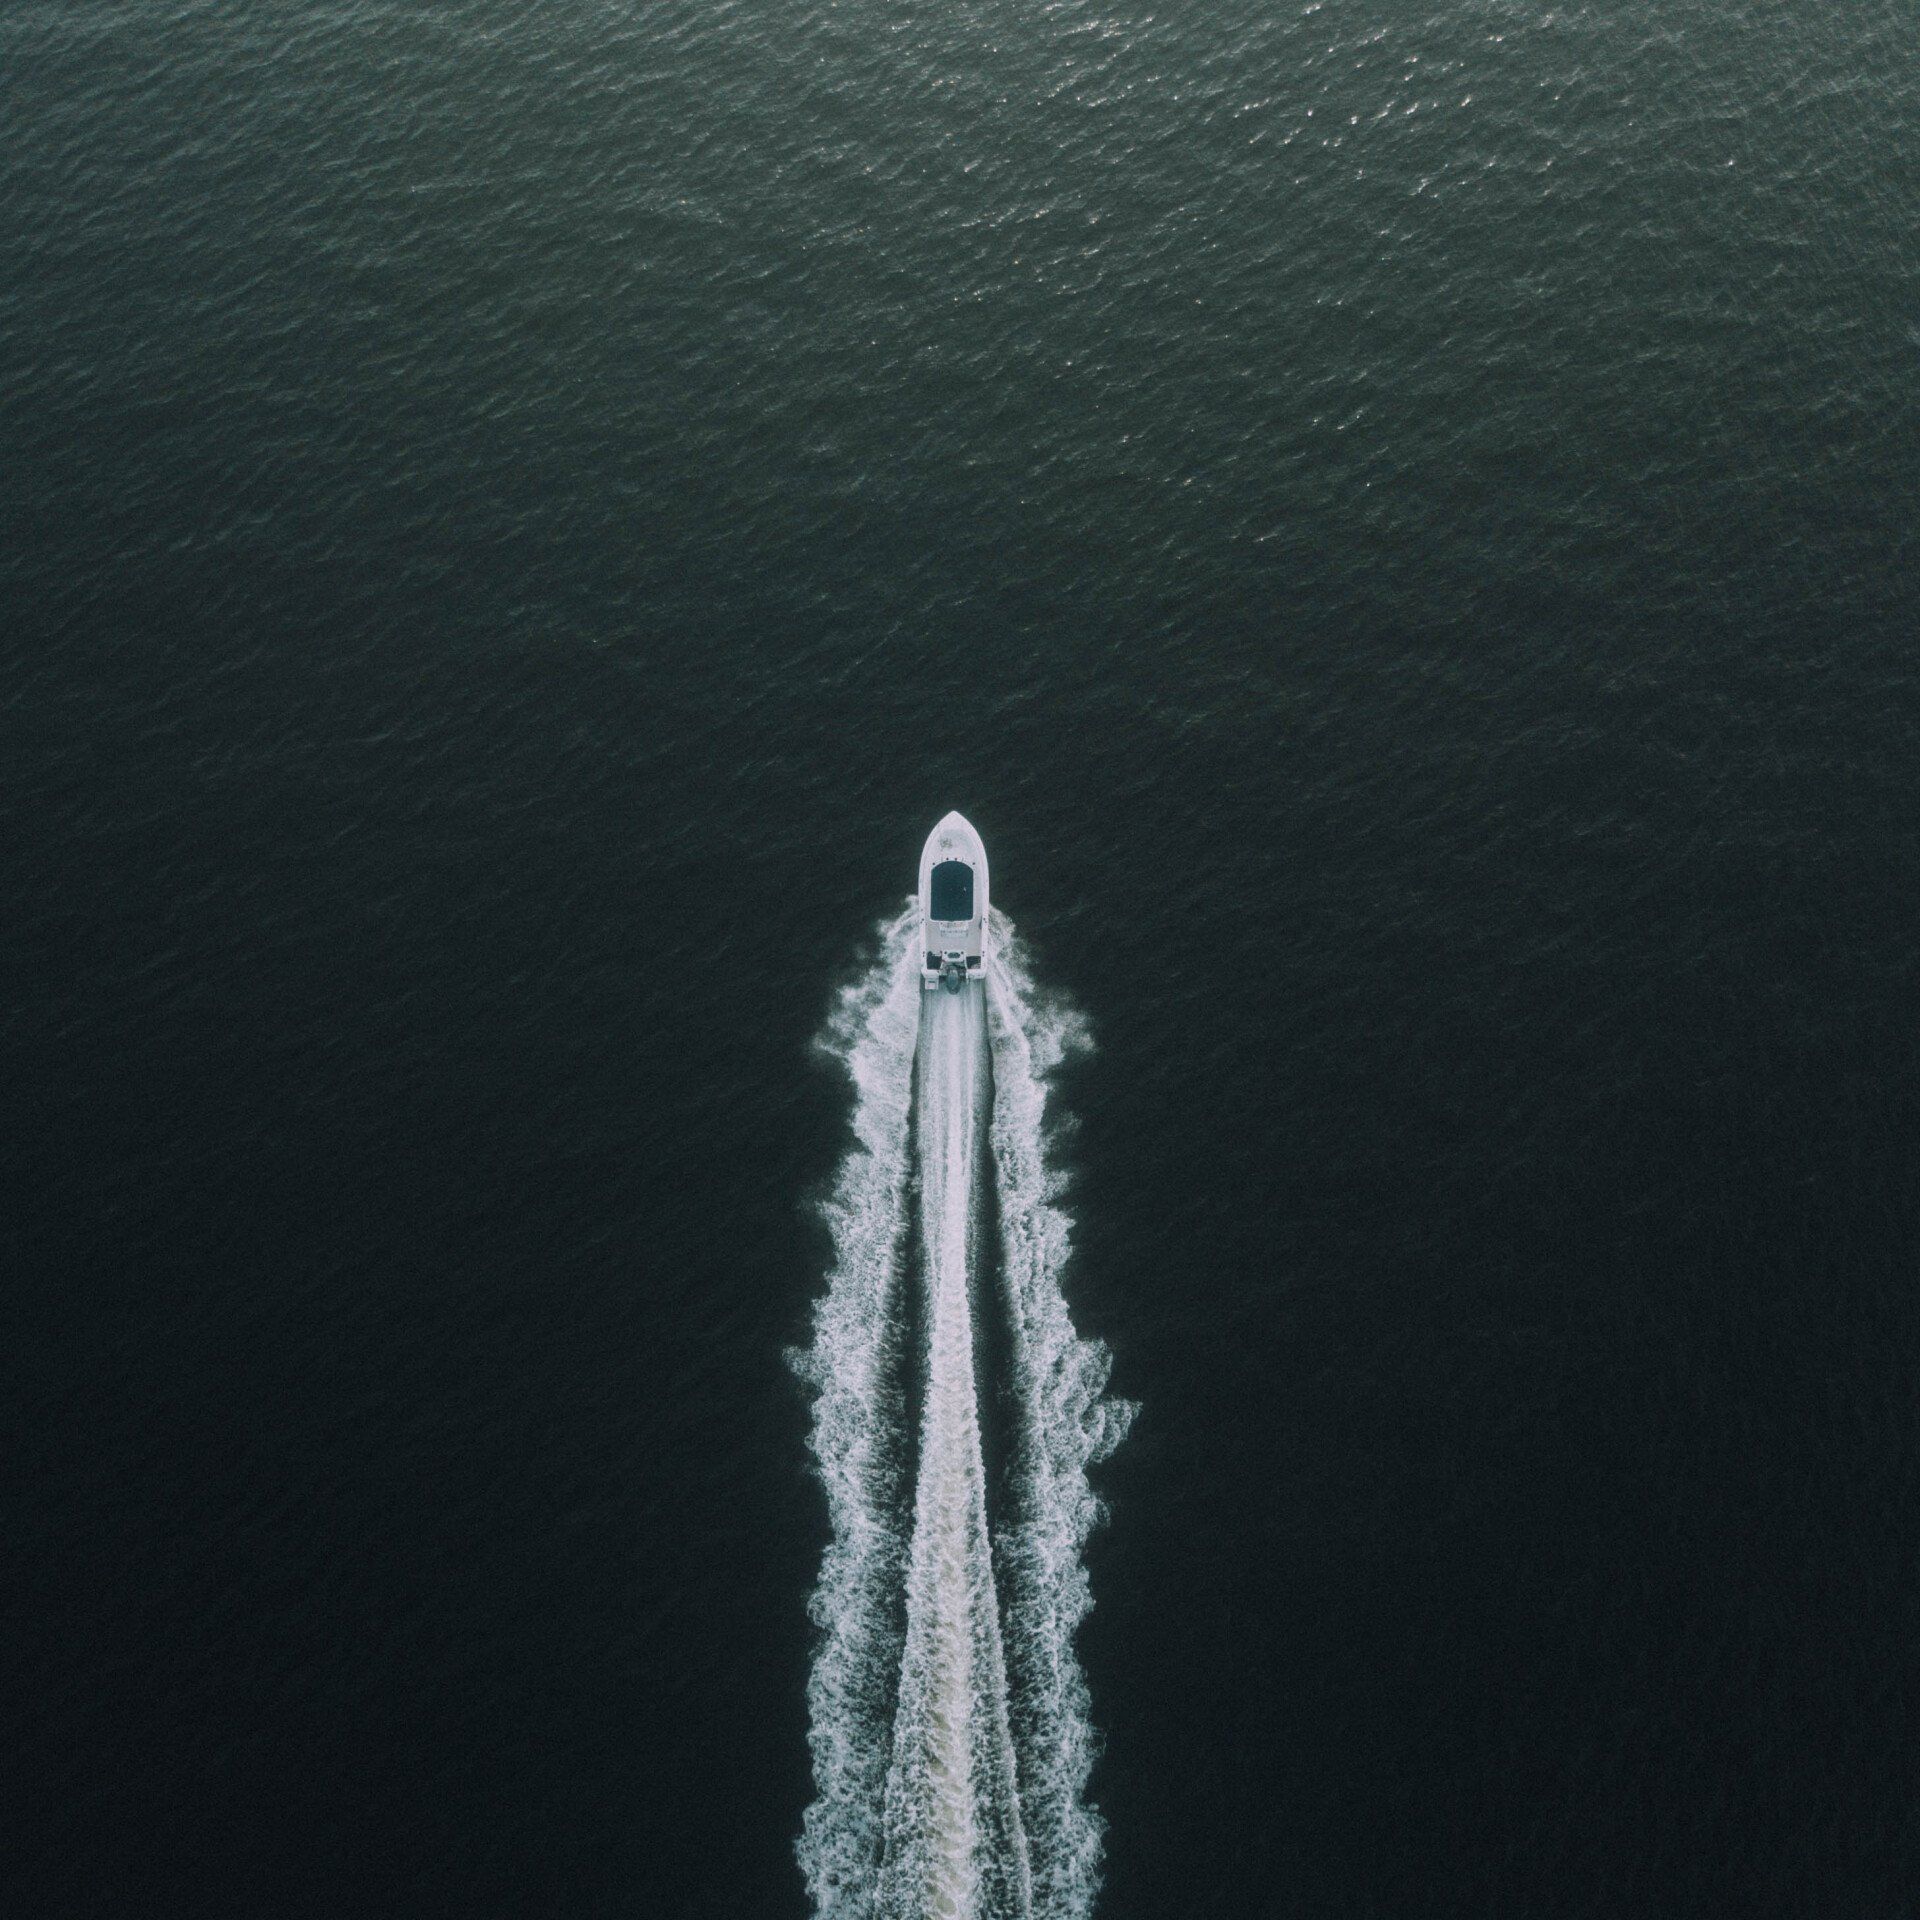 An aerial view of a boat in the ocean